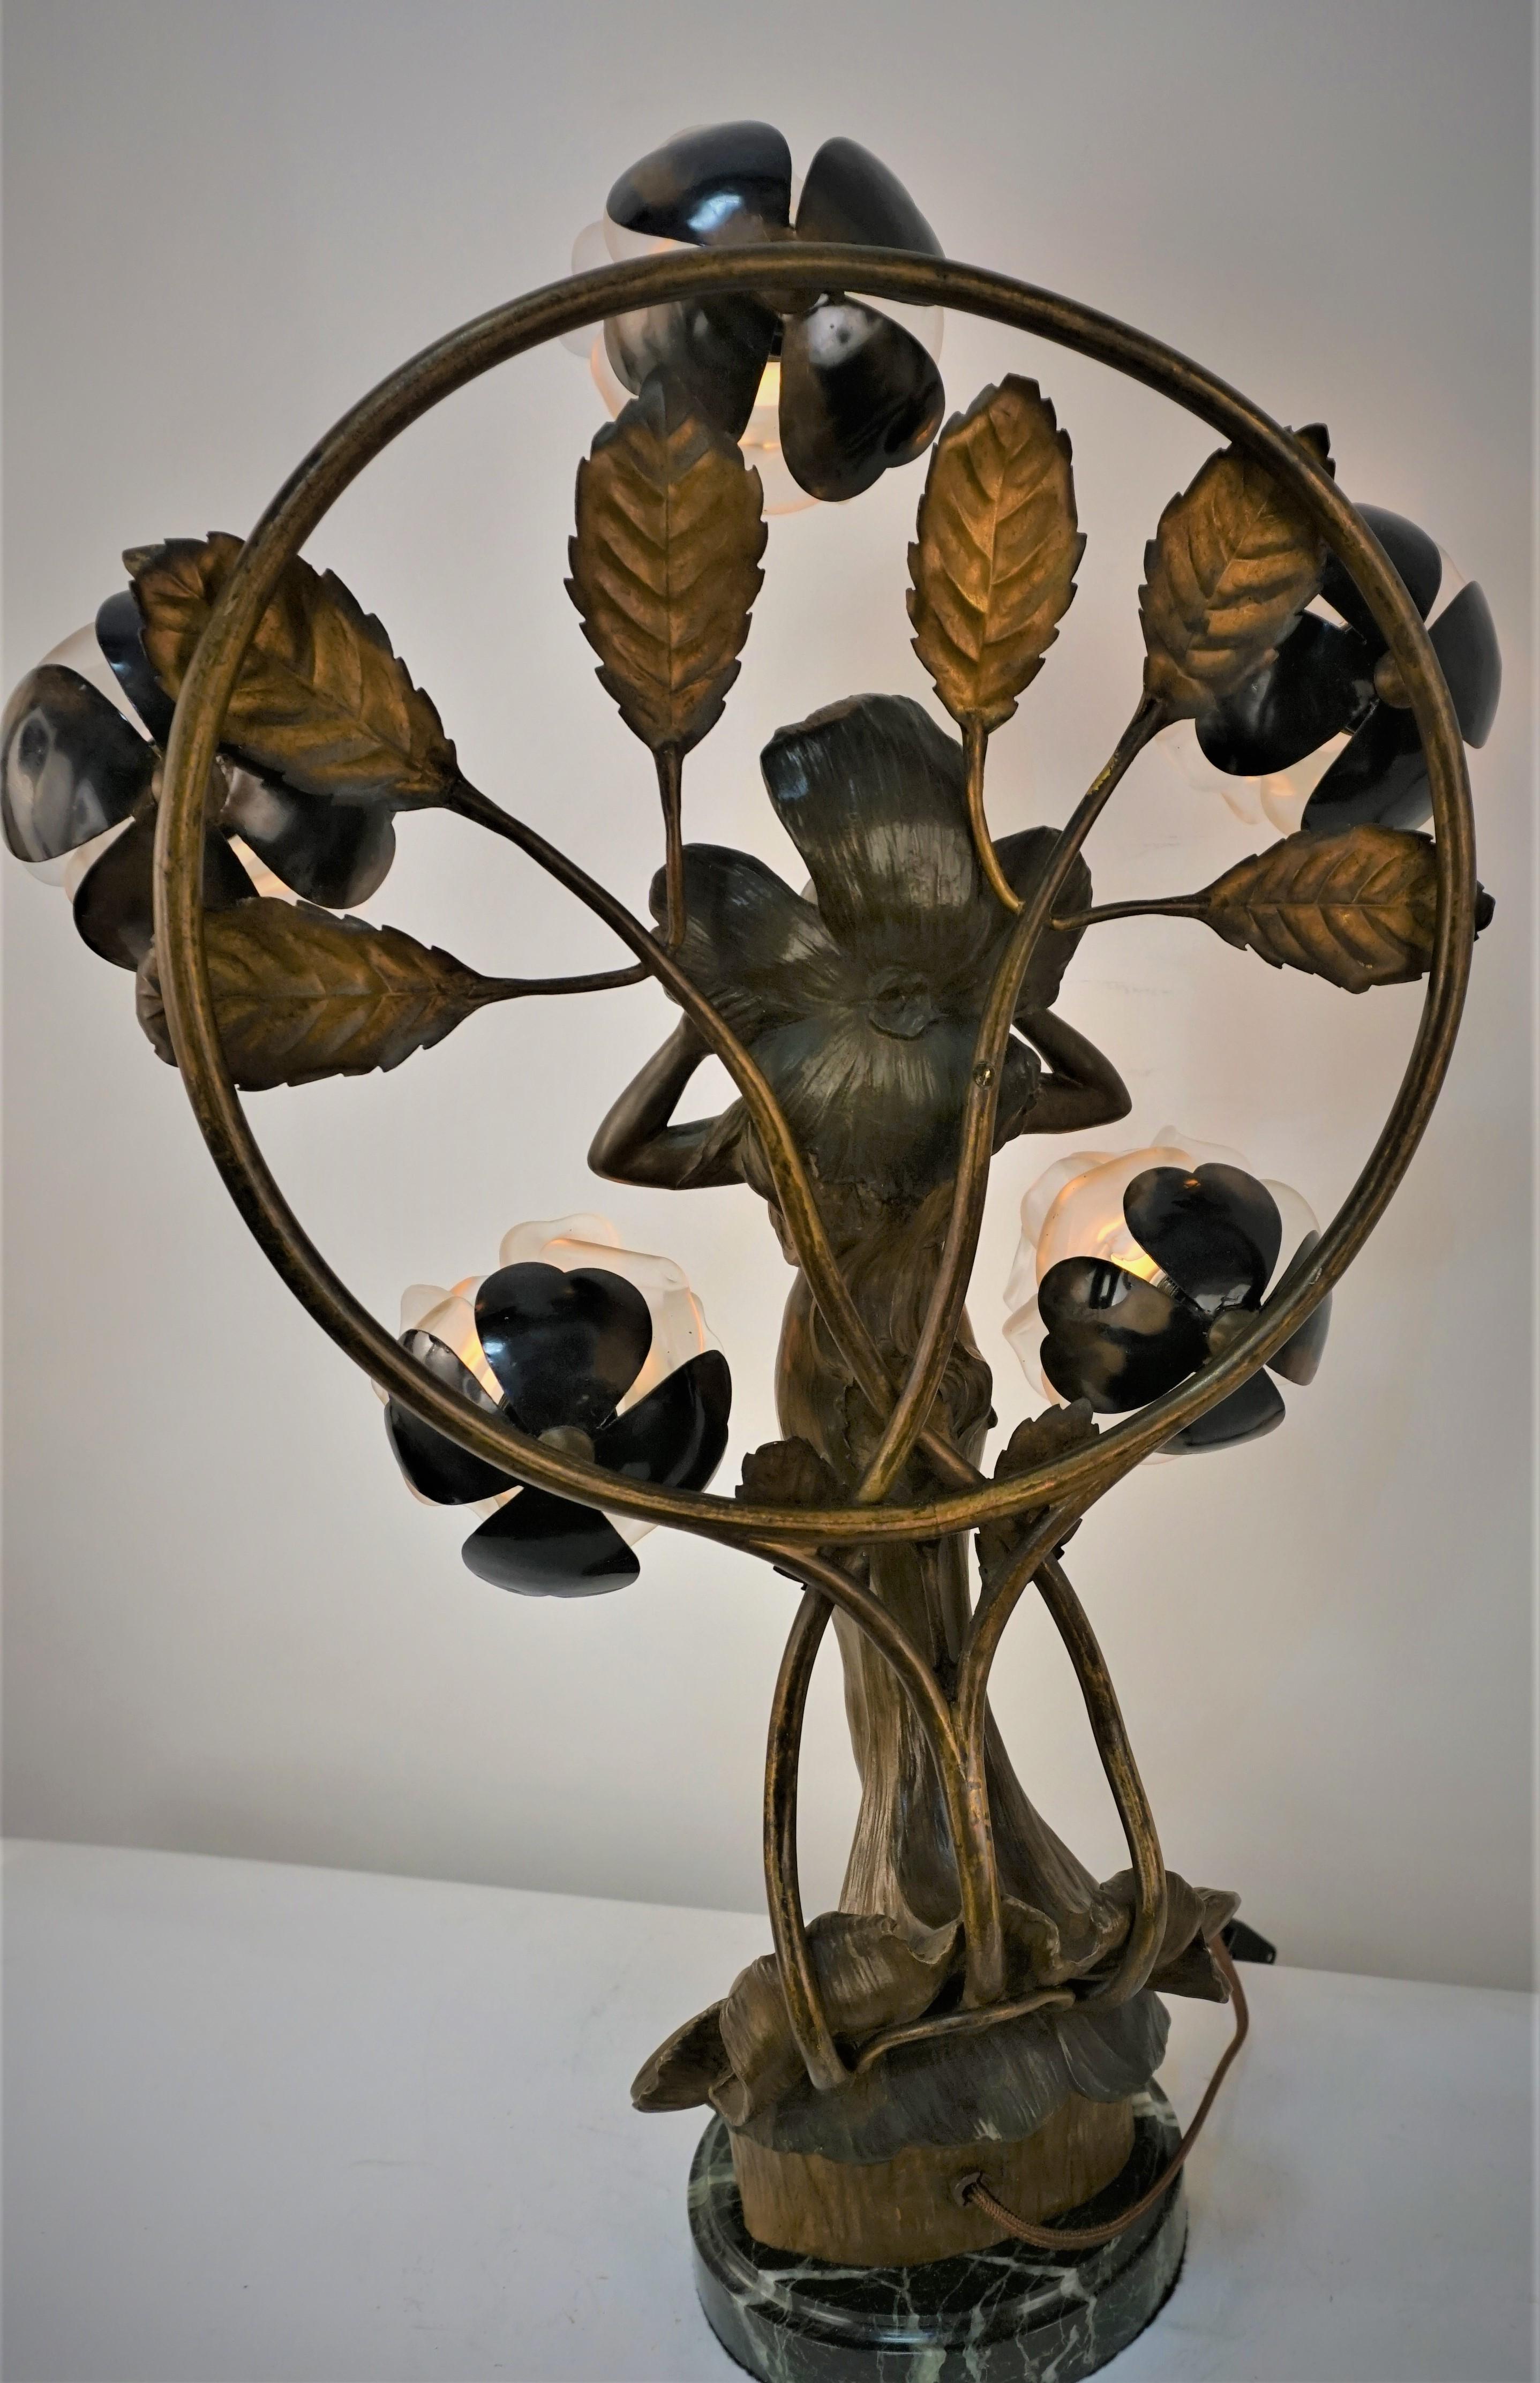 French Art Nouveau Bronze Sculpture Table Lamp In Good Condition For Sale In Fairfax, VA